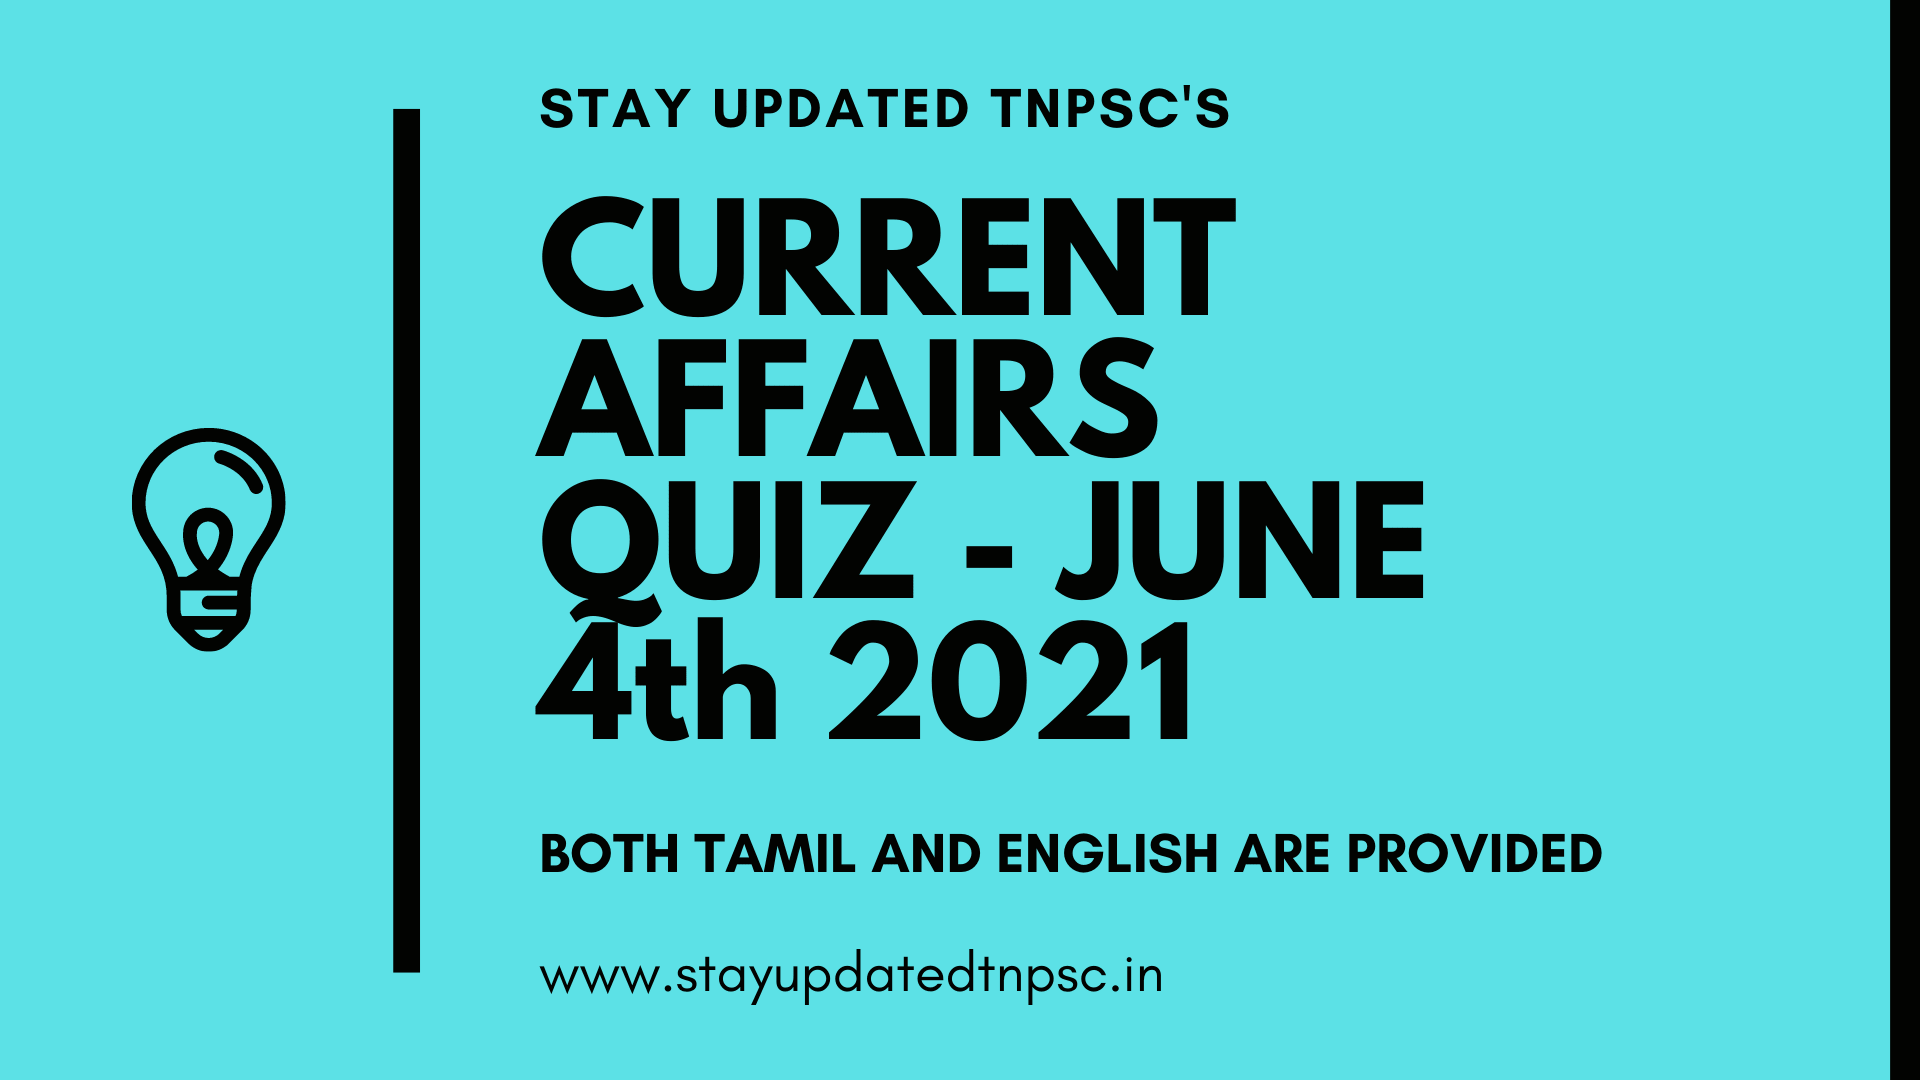 TNPSC DAILY CURRENT AFFAIRS: 04 JUNE 2021